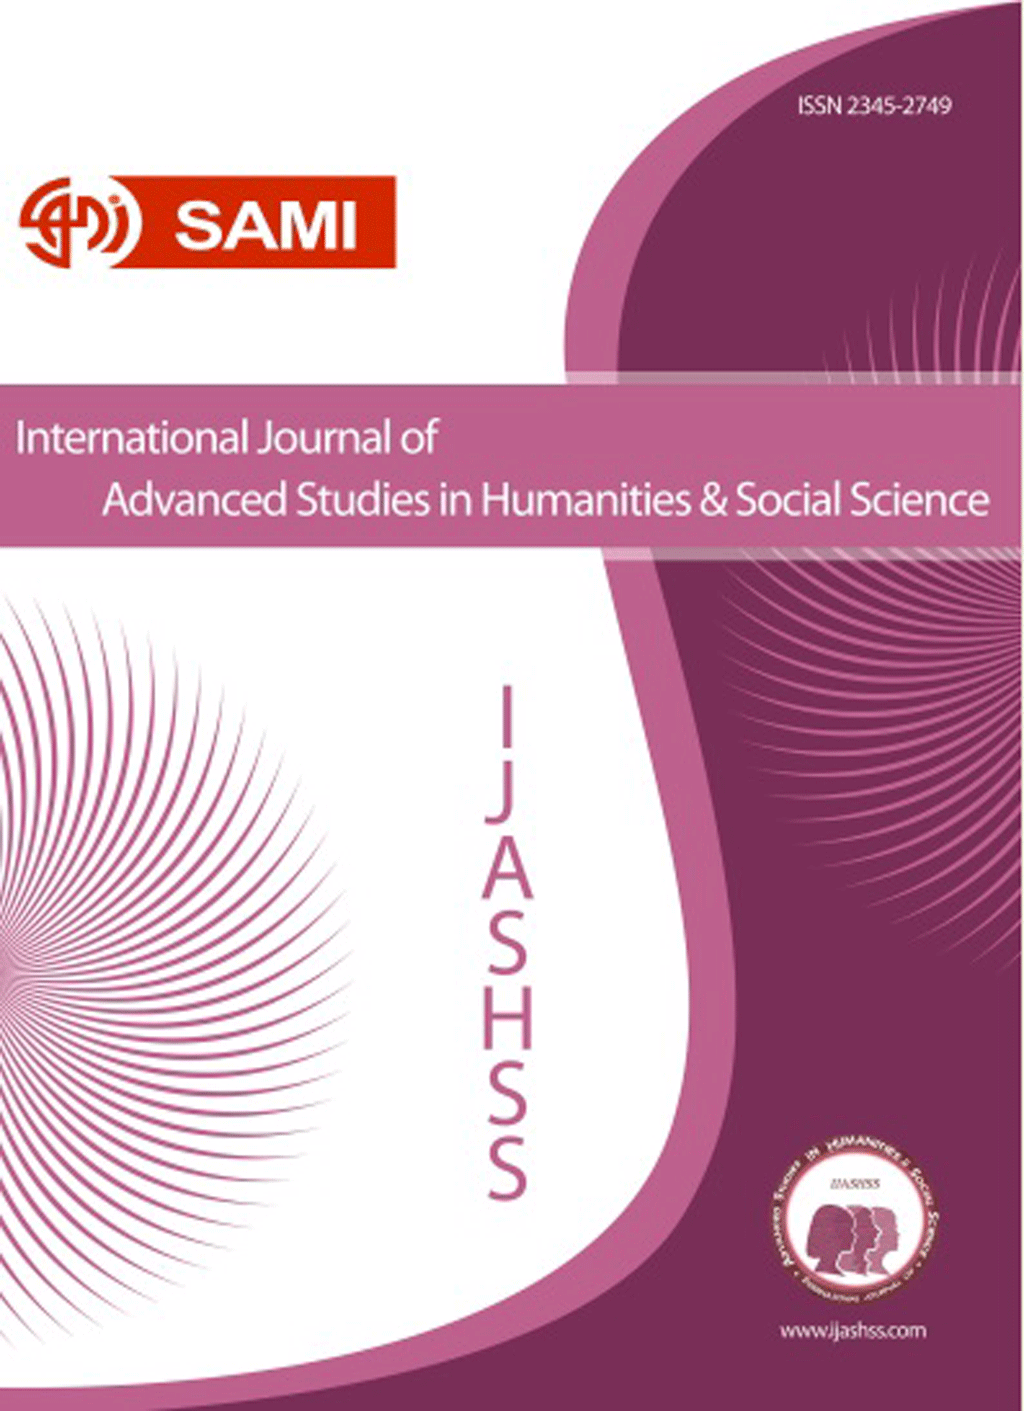 International Journal of Advanced Studies in Humanities and Social Science - January 2012, Volume 1 -  Issue 1